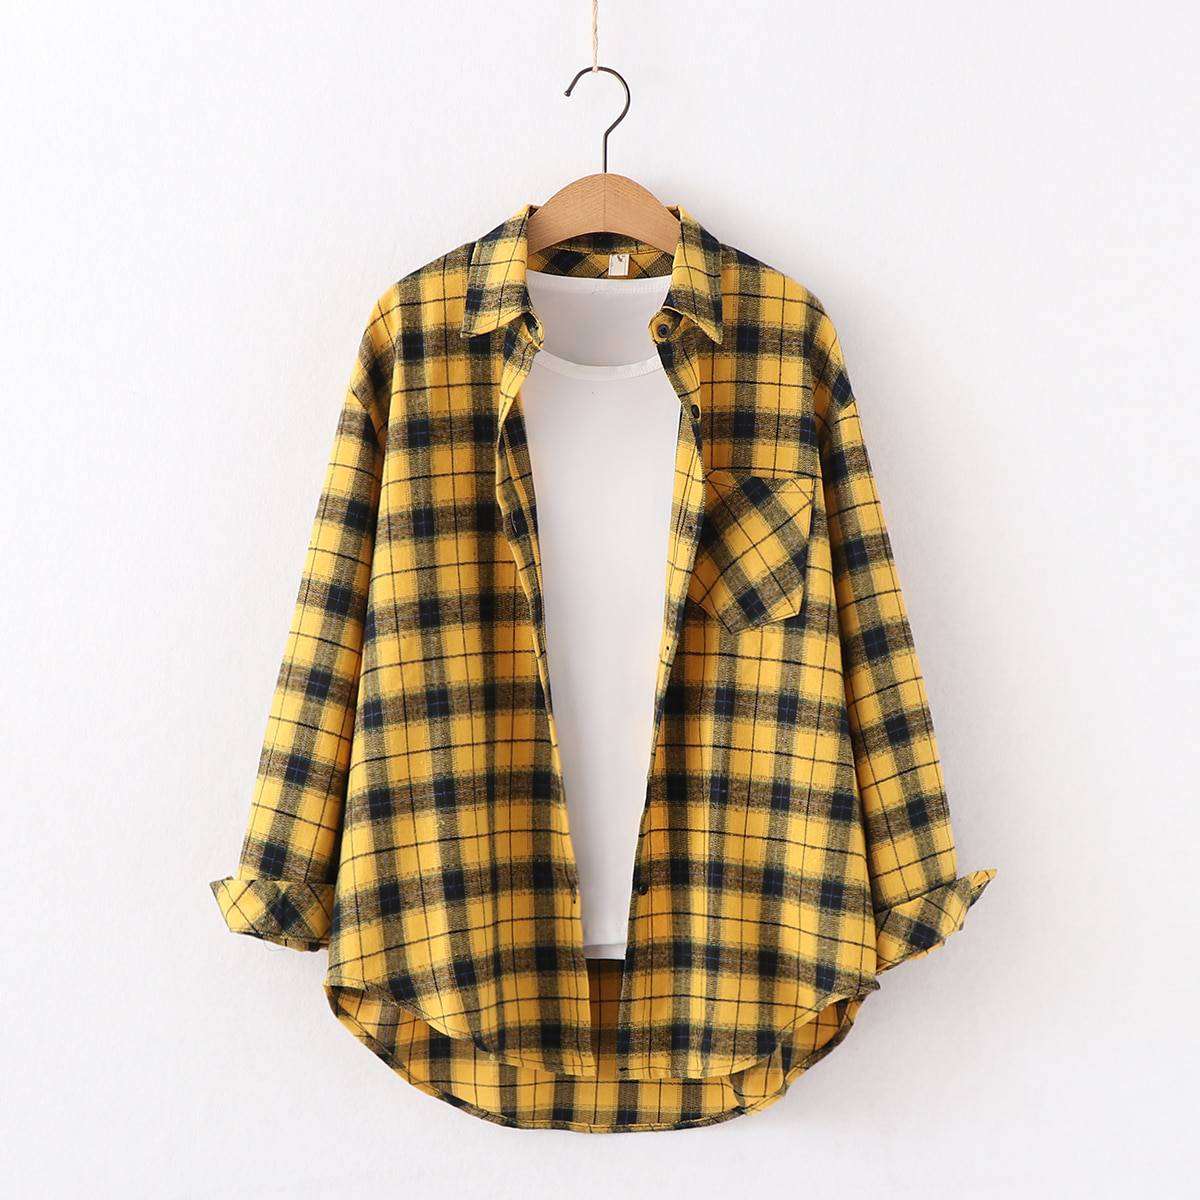 FREE SHIPPING Vintage Plaid Shirt Long Sleeve OUT0789